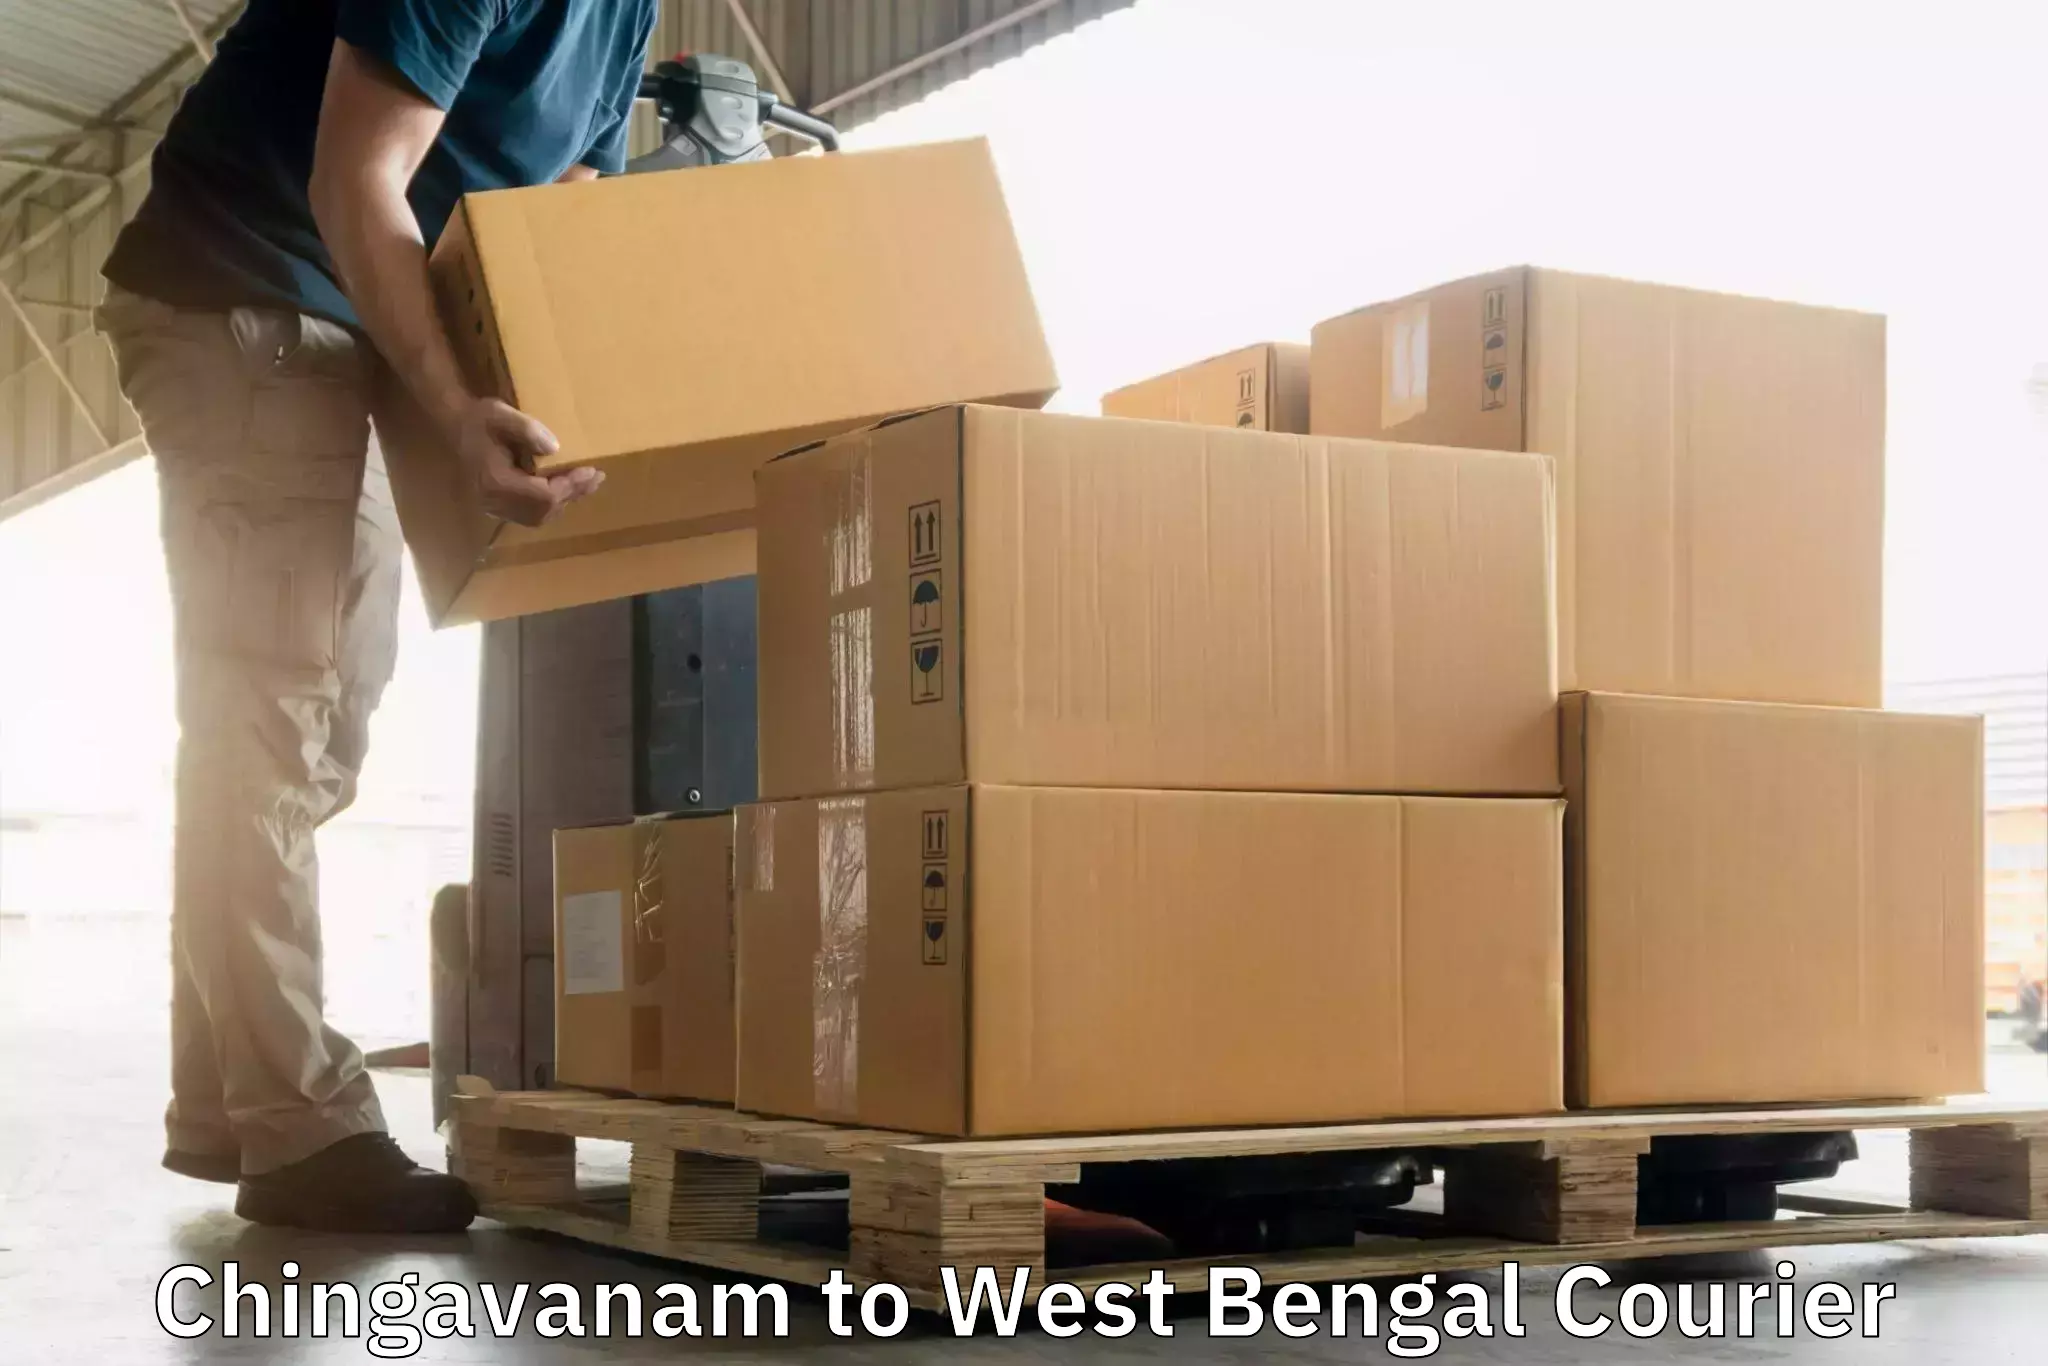 High-speed parcel service Chingavanam to West Bengal